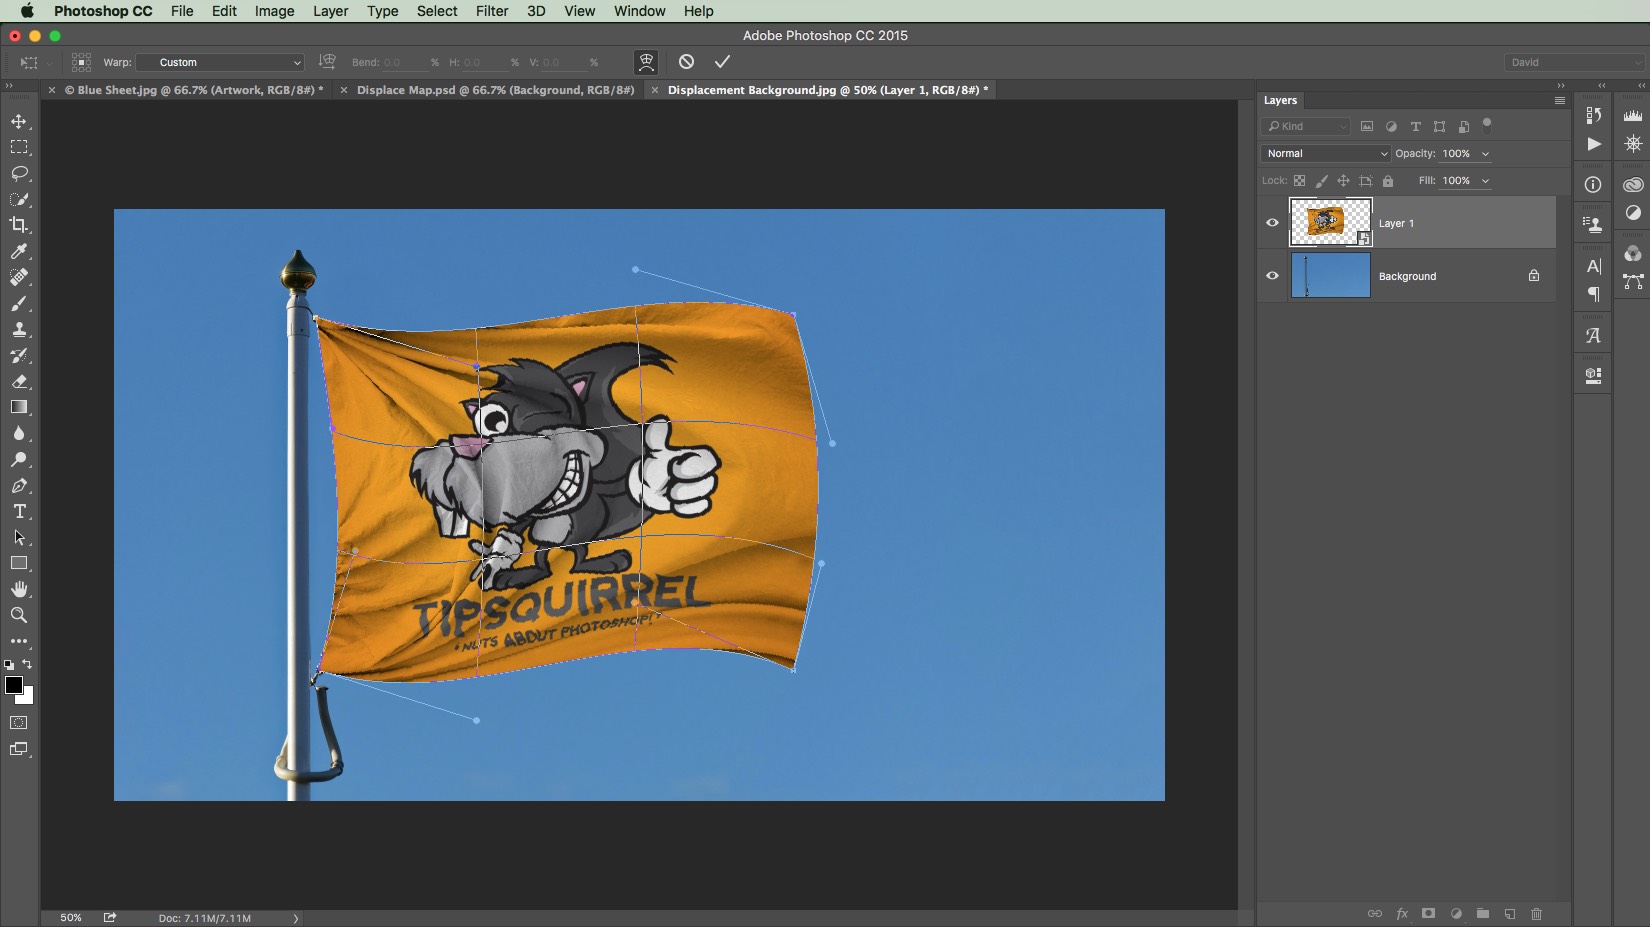 How To Create A Rippling Flag Using The Displace Filter In Adobe Photoshop  - TipSquirrel